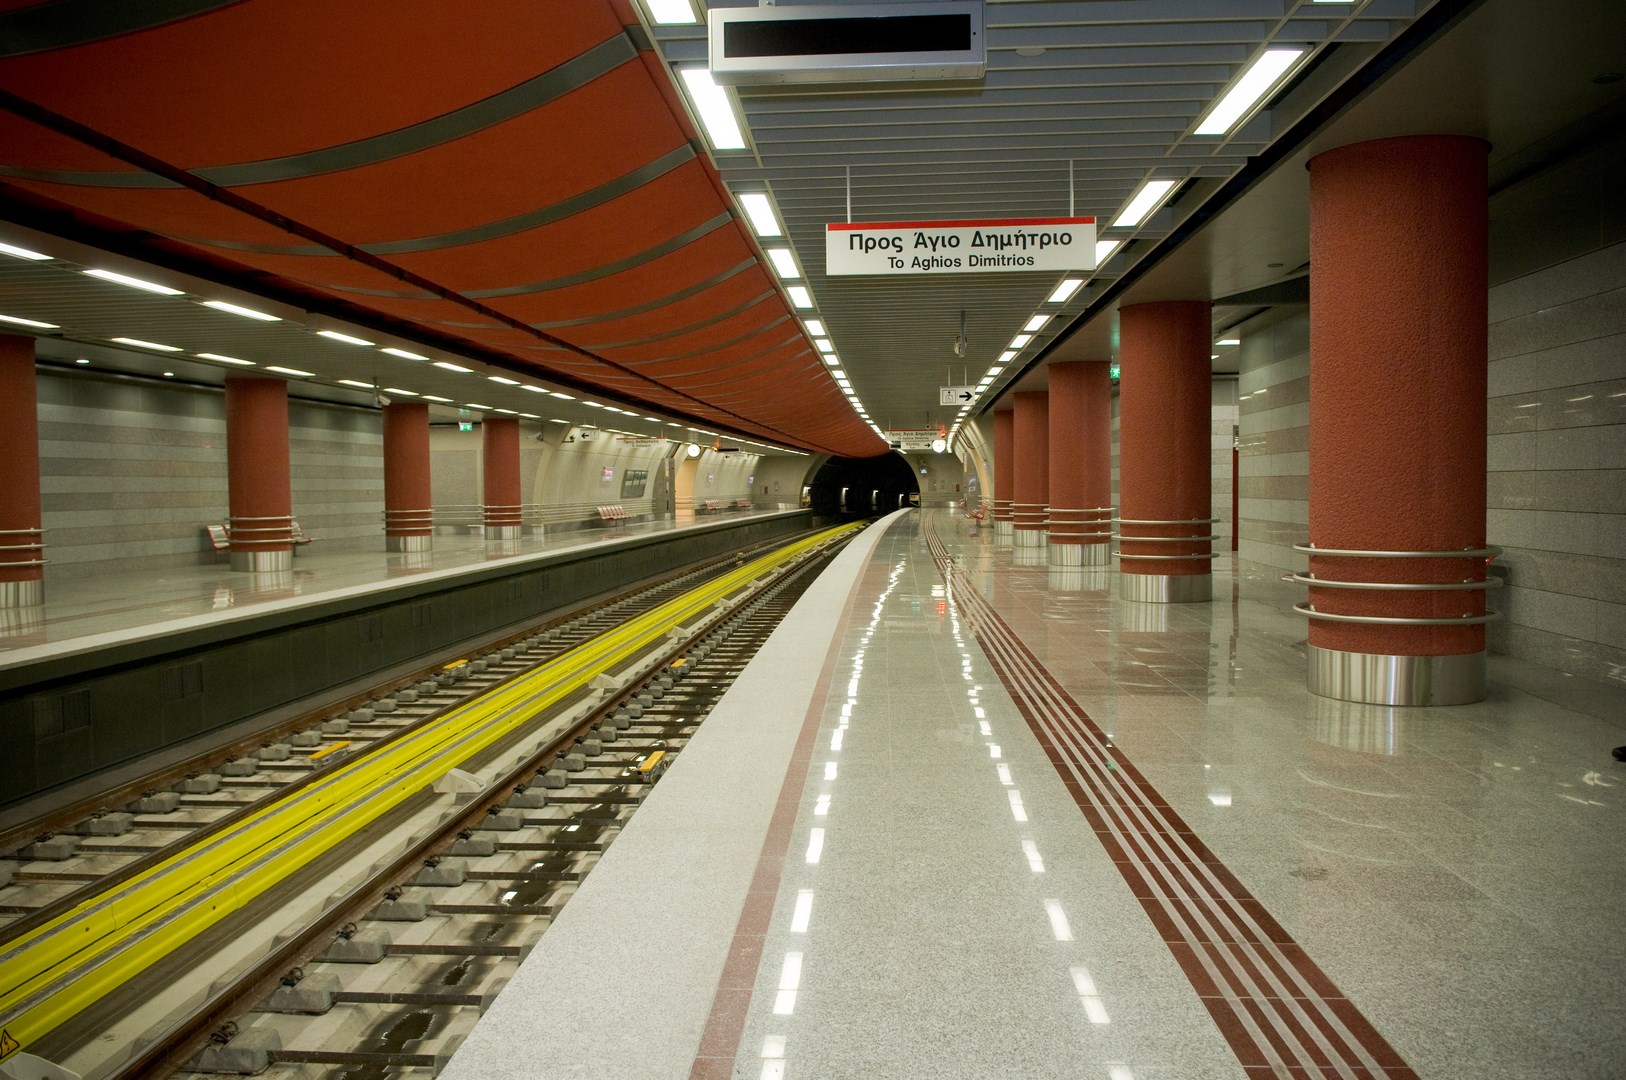 Line 2 of the Athens Metro